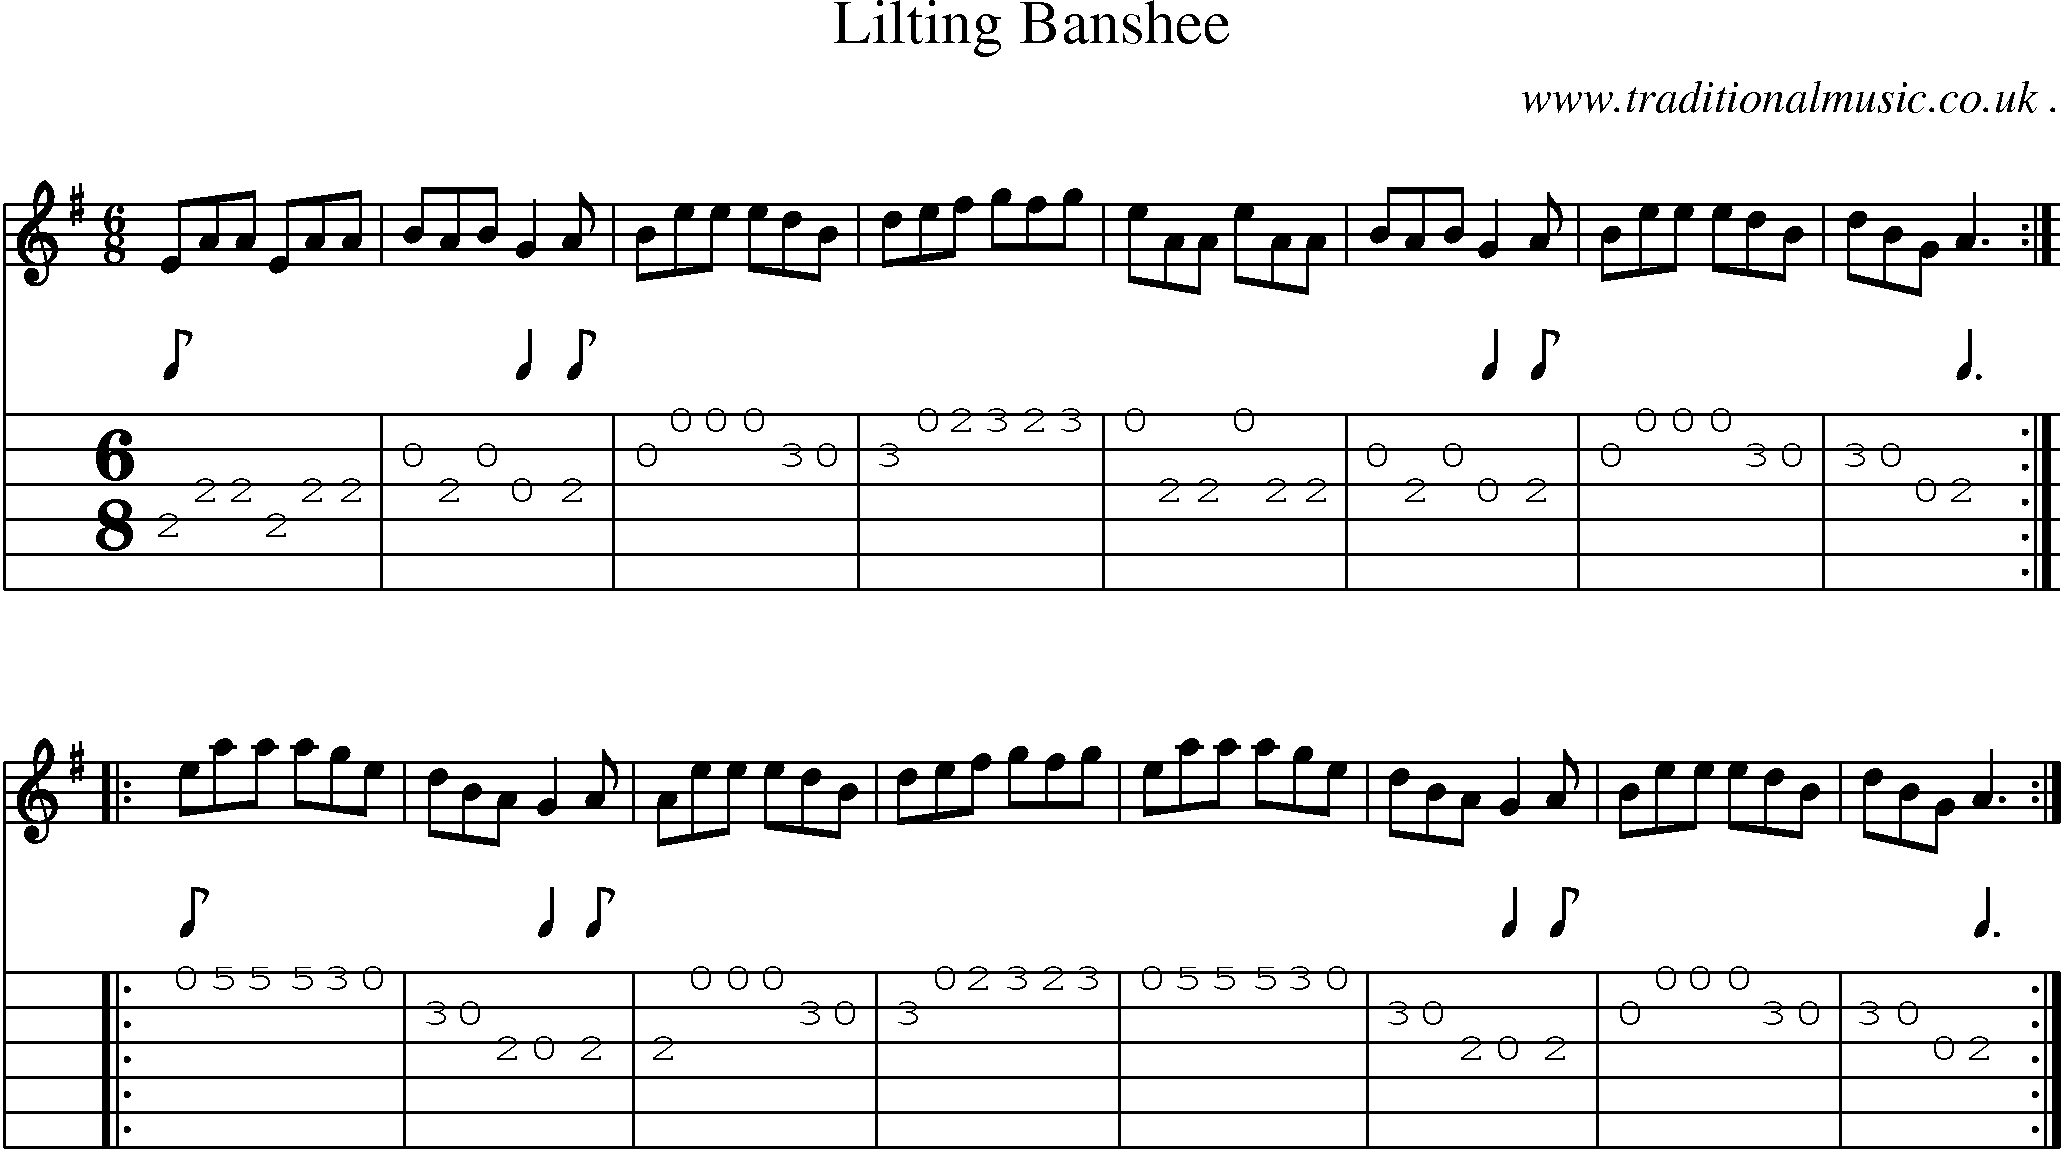 Sheet-Music and Guitar Tabs for Lilting Banshee